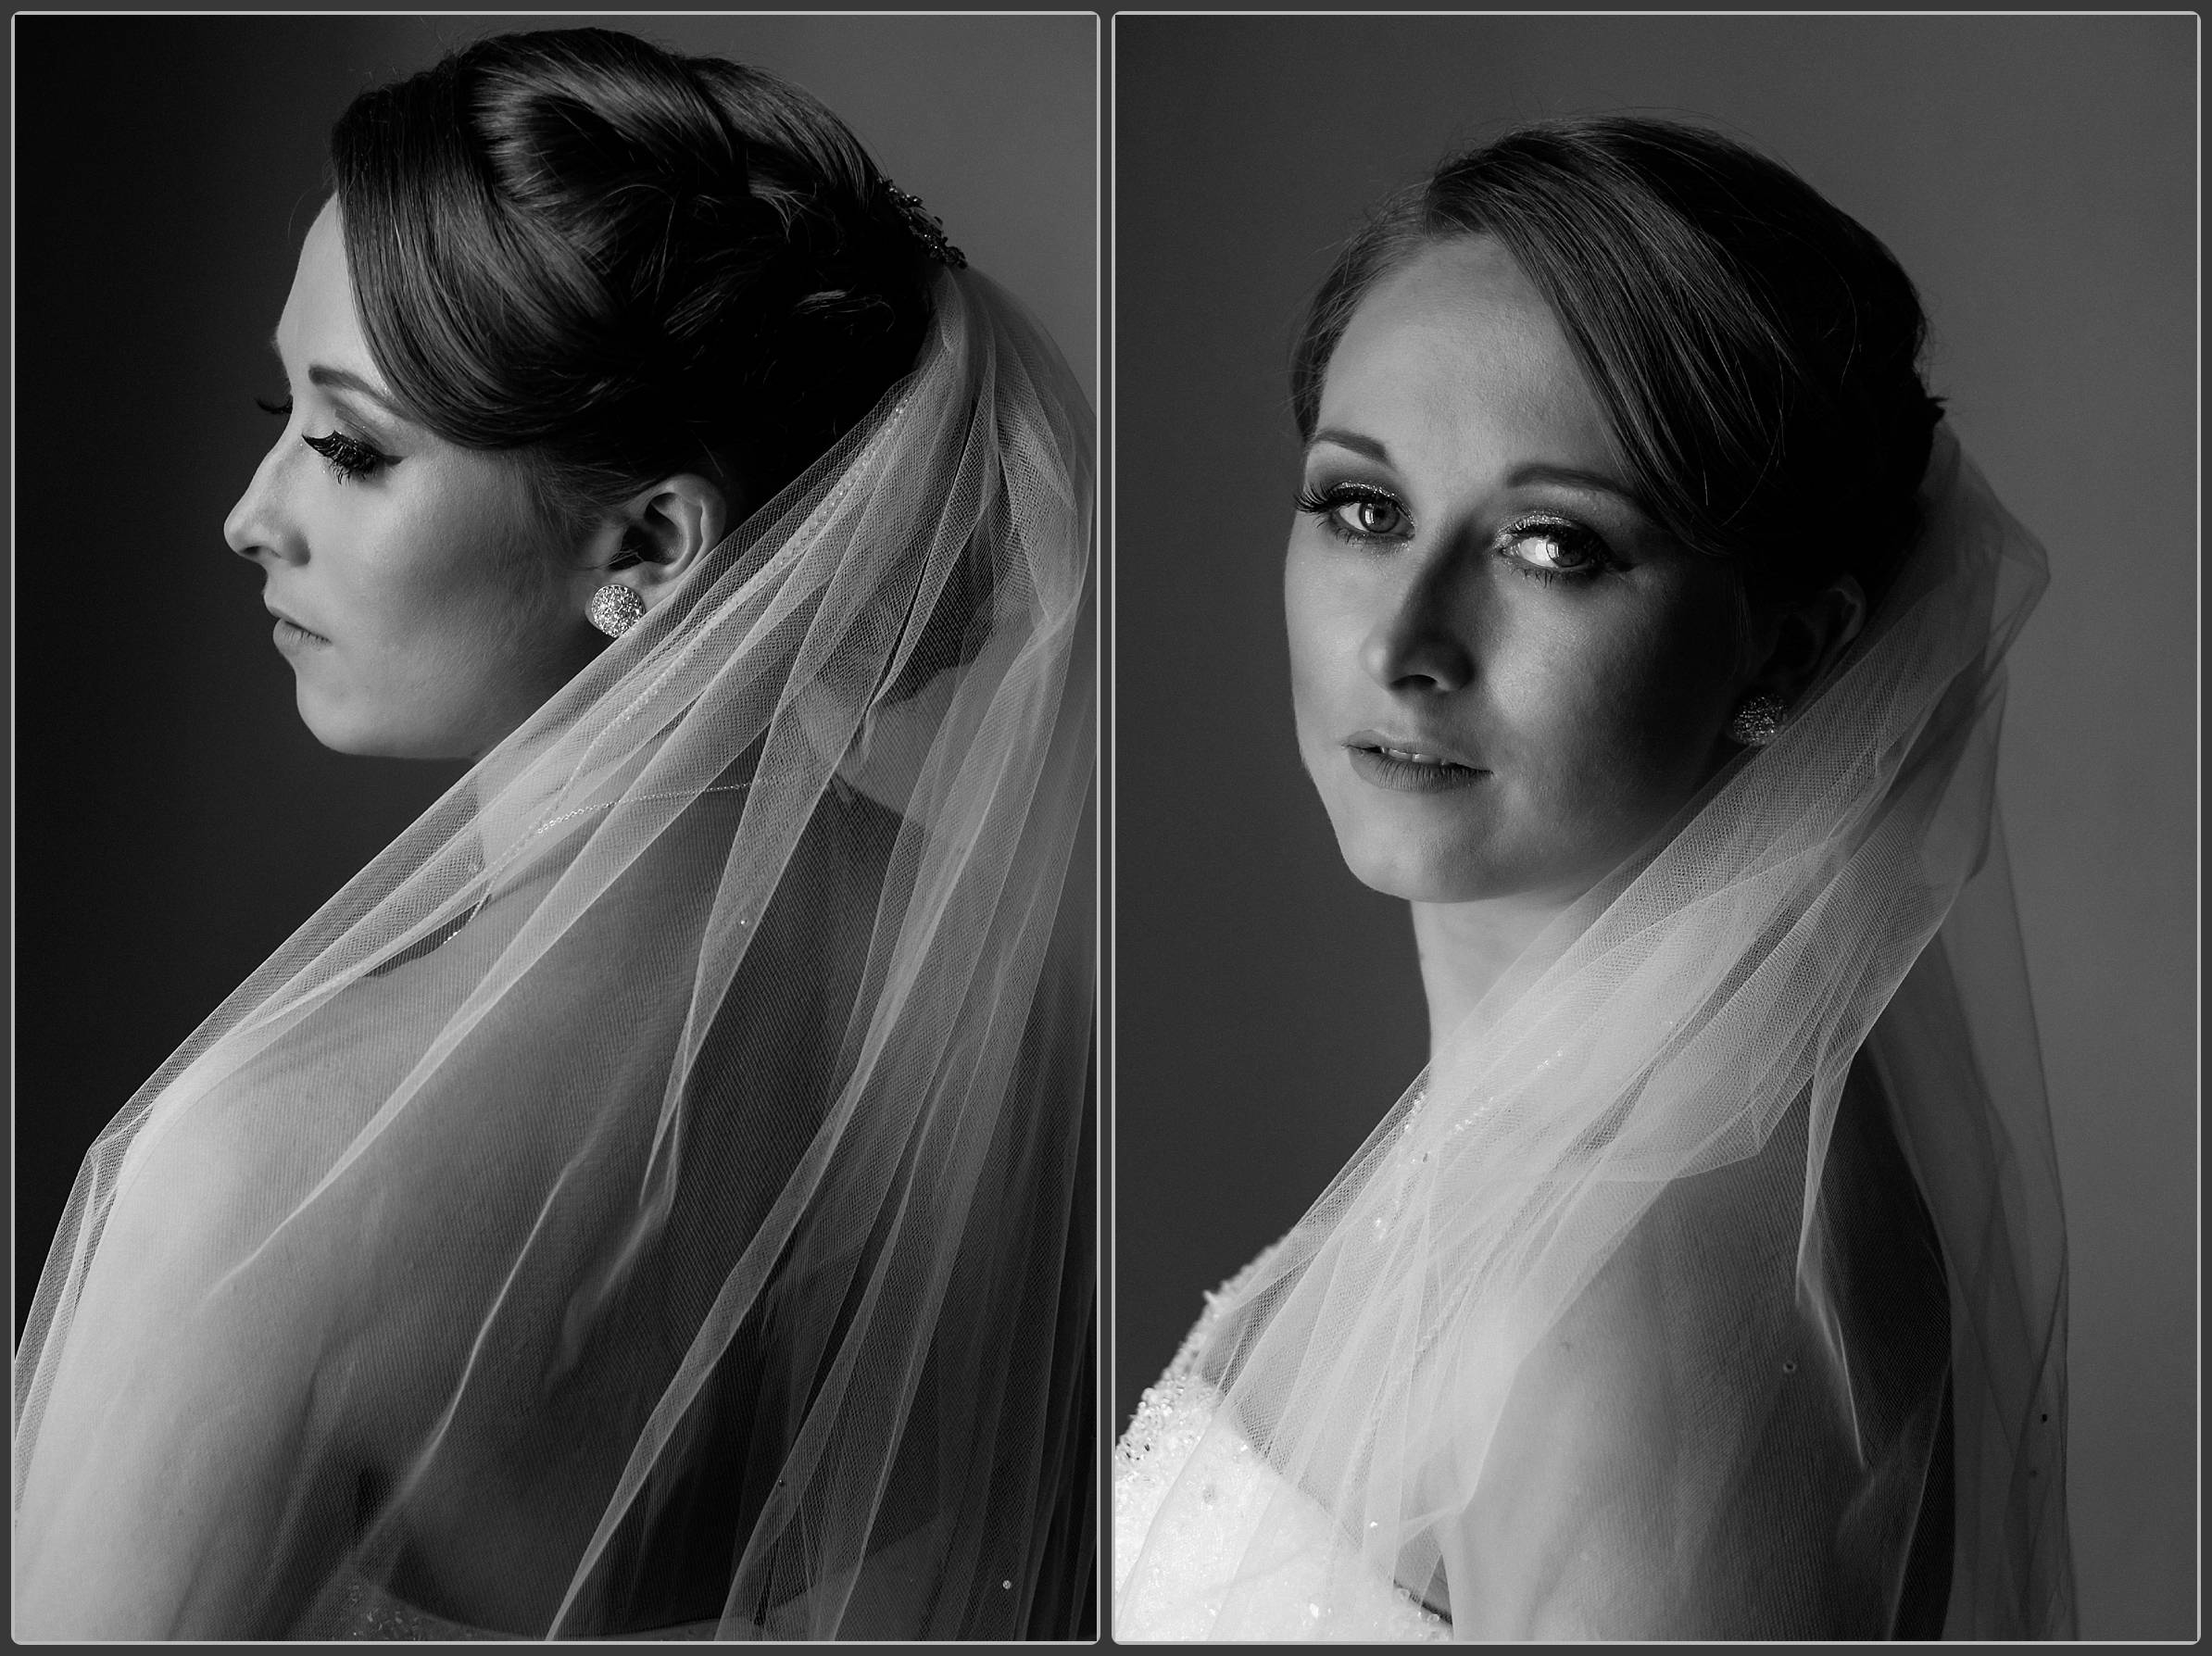 The gorgeous bride in black and white 3